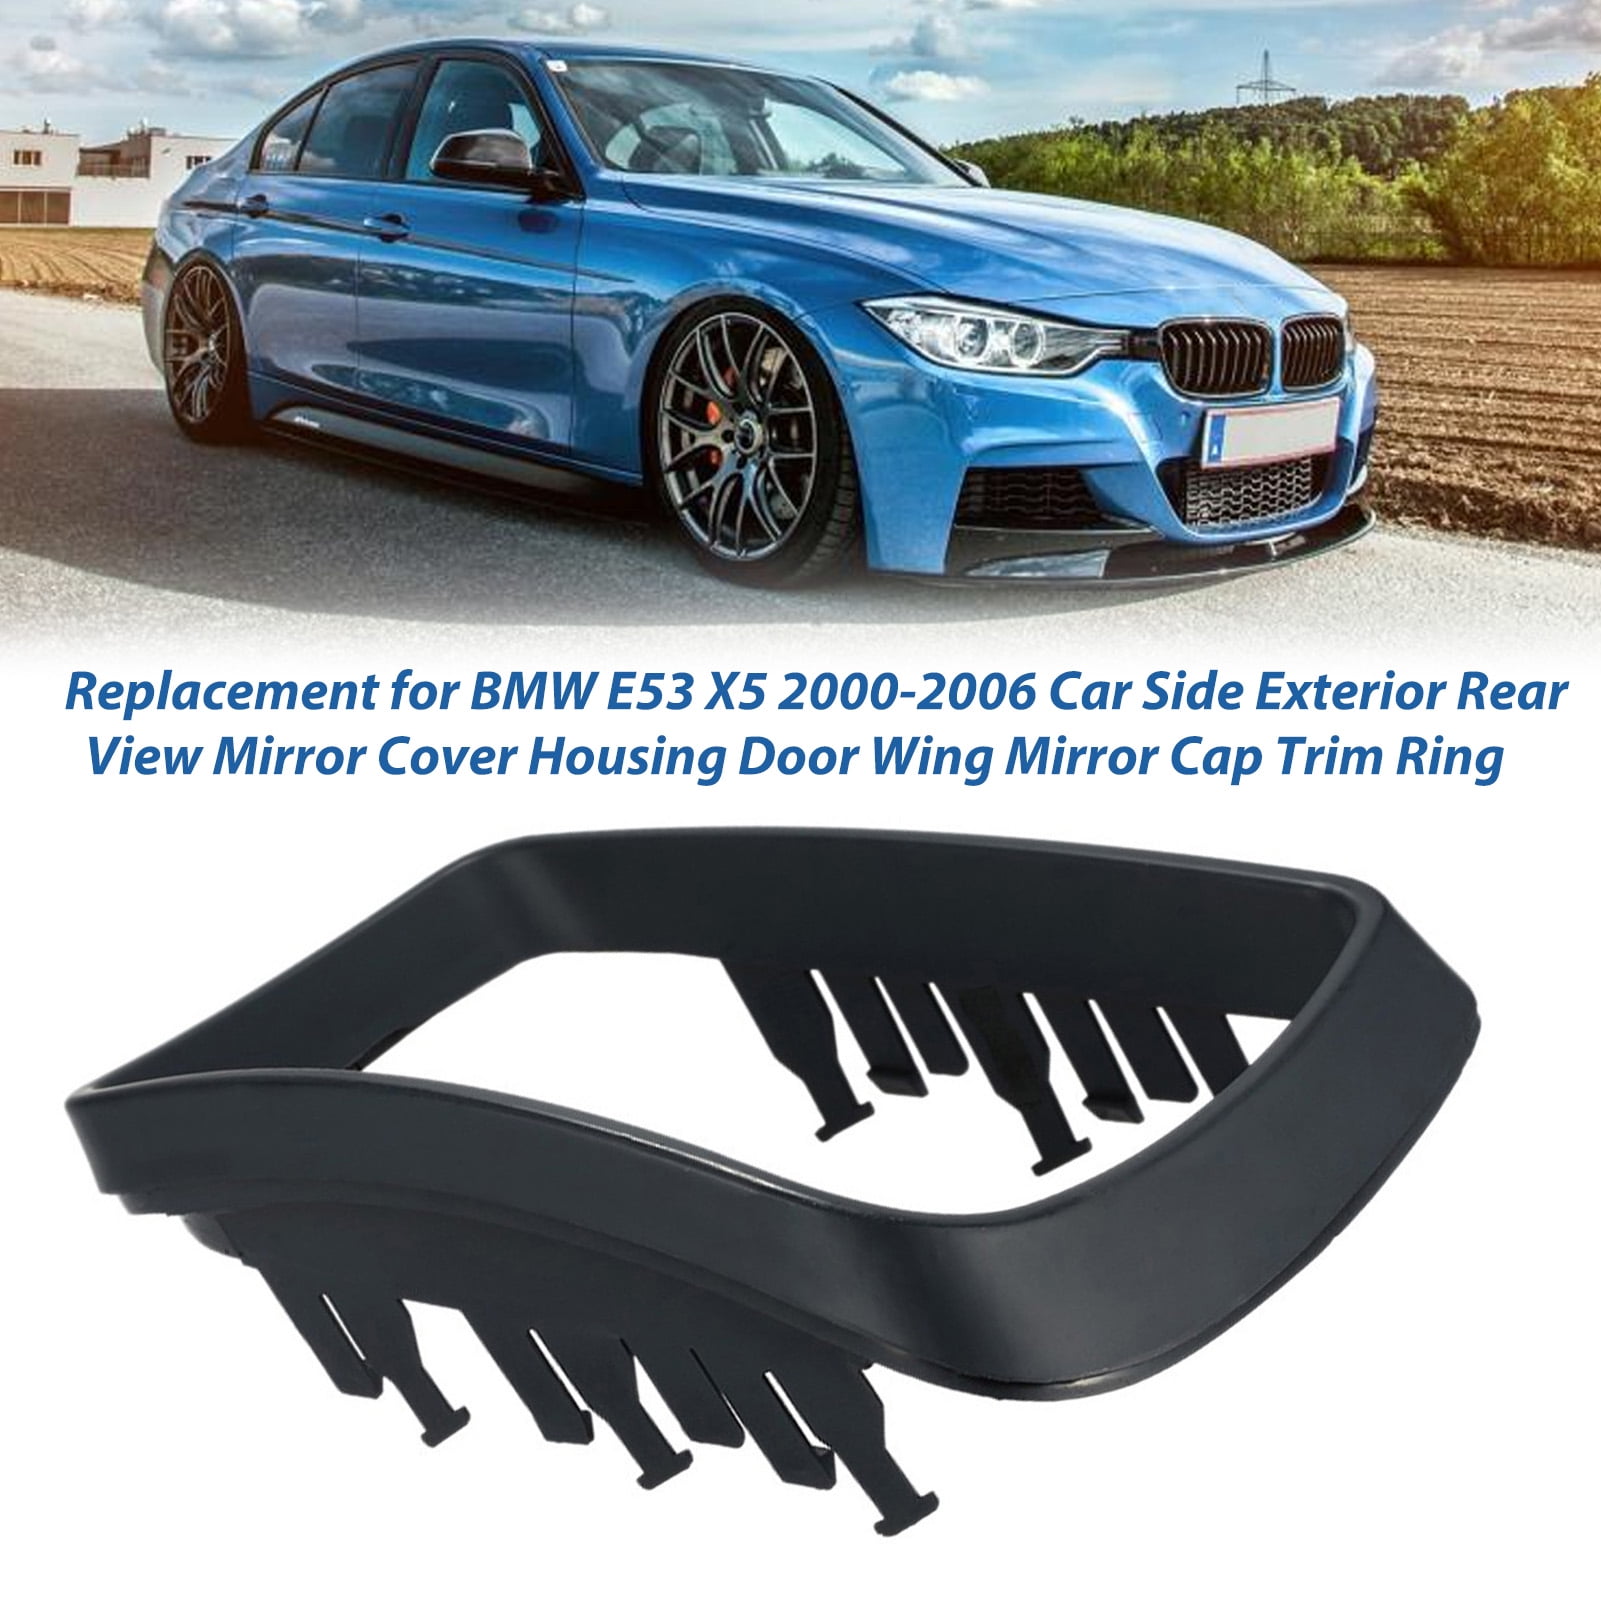 Walmeck Replacement for E53 X5 2000-2006 Car Side Exterior Rear View Mirror  Cover Housing Door Wing Mirror Trim Ring